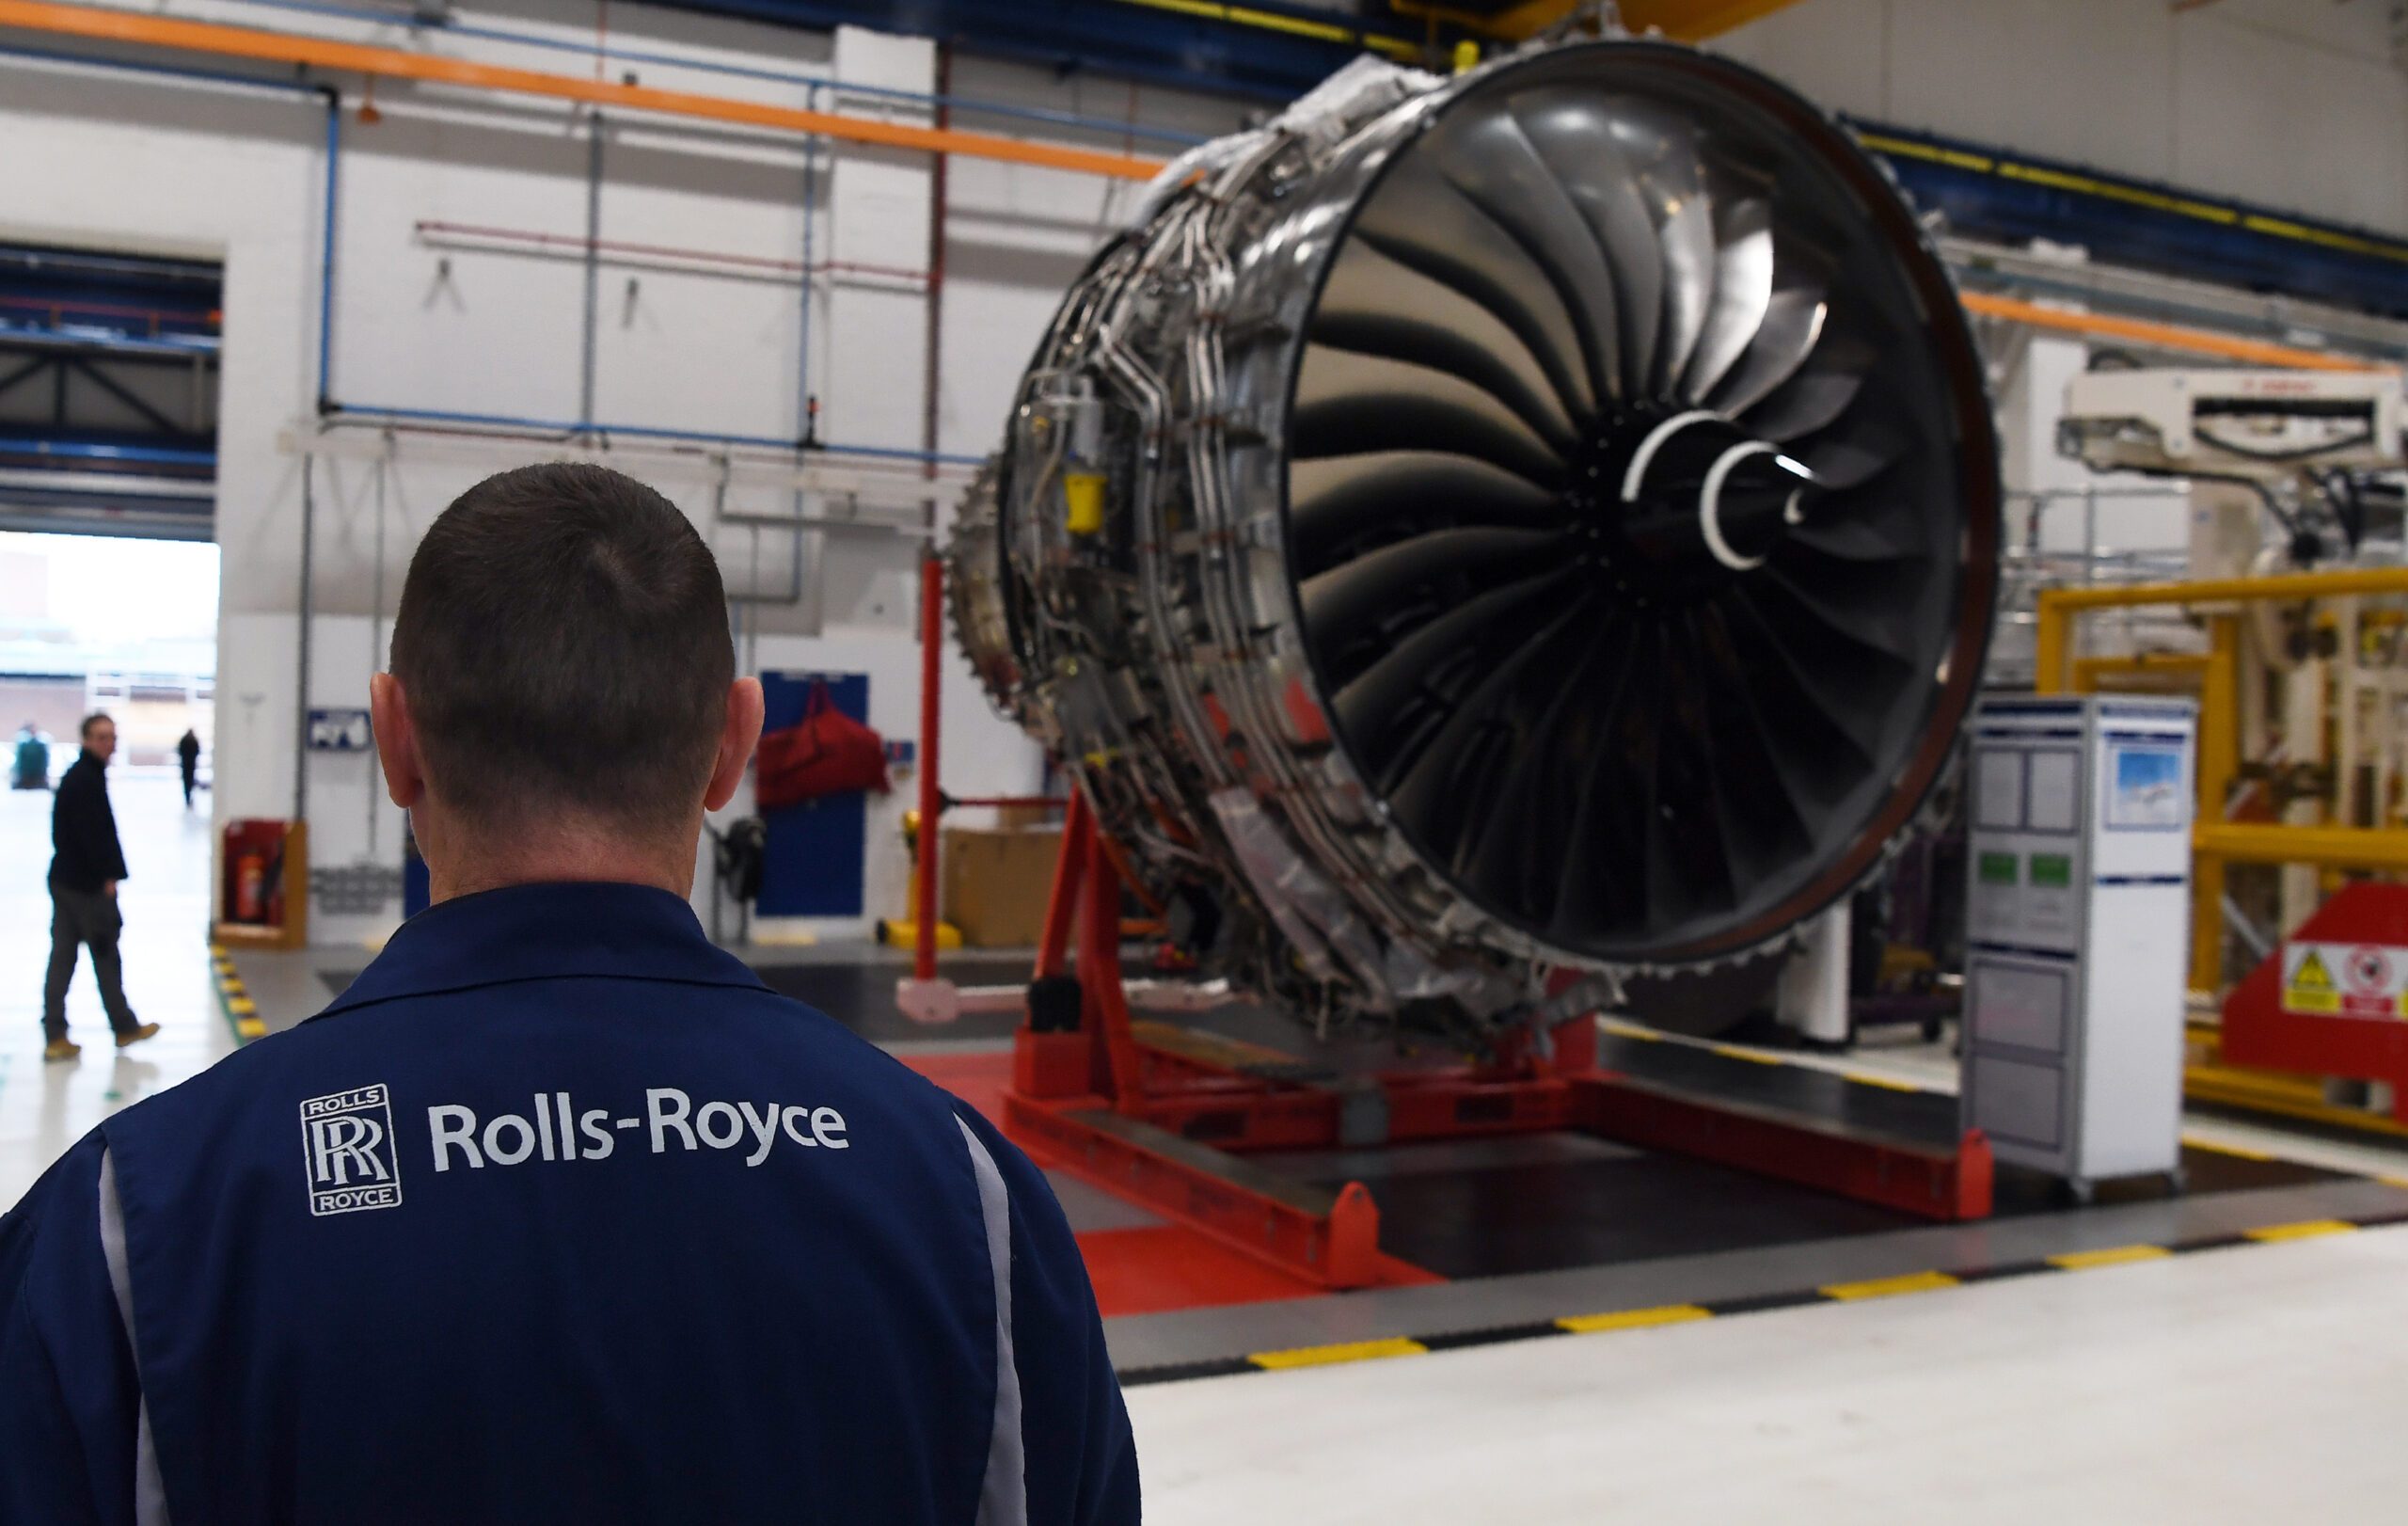 A Rolls Royce Trent XWB engine, designed specifically for the Airbus A350, at the Rolls Royce factory in Derby, England